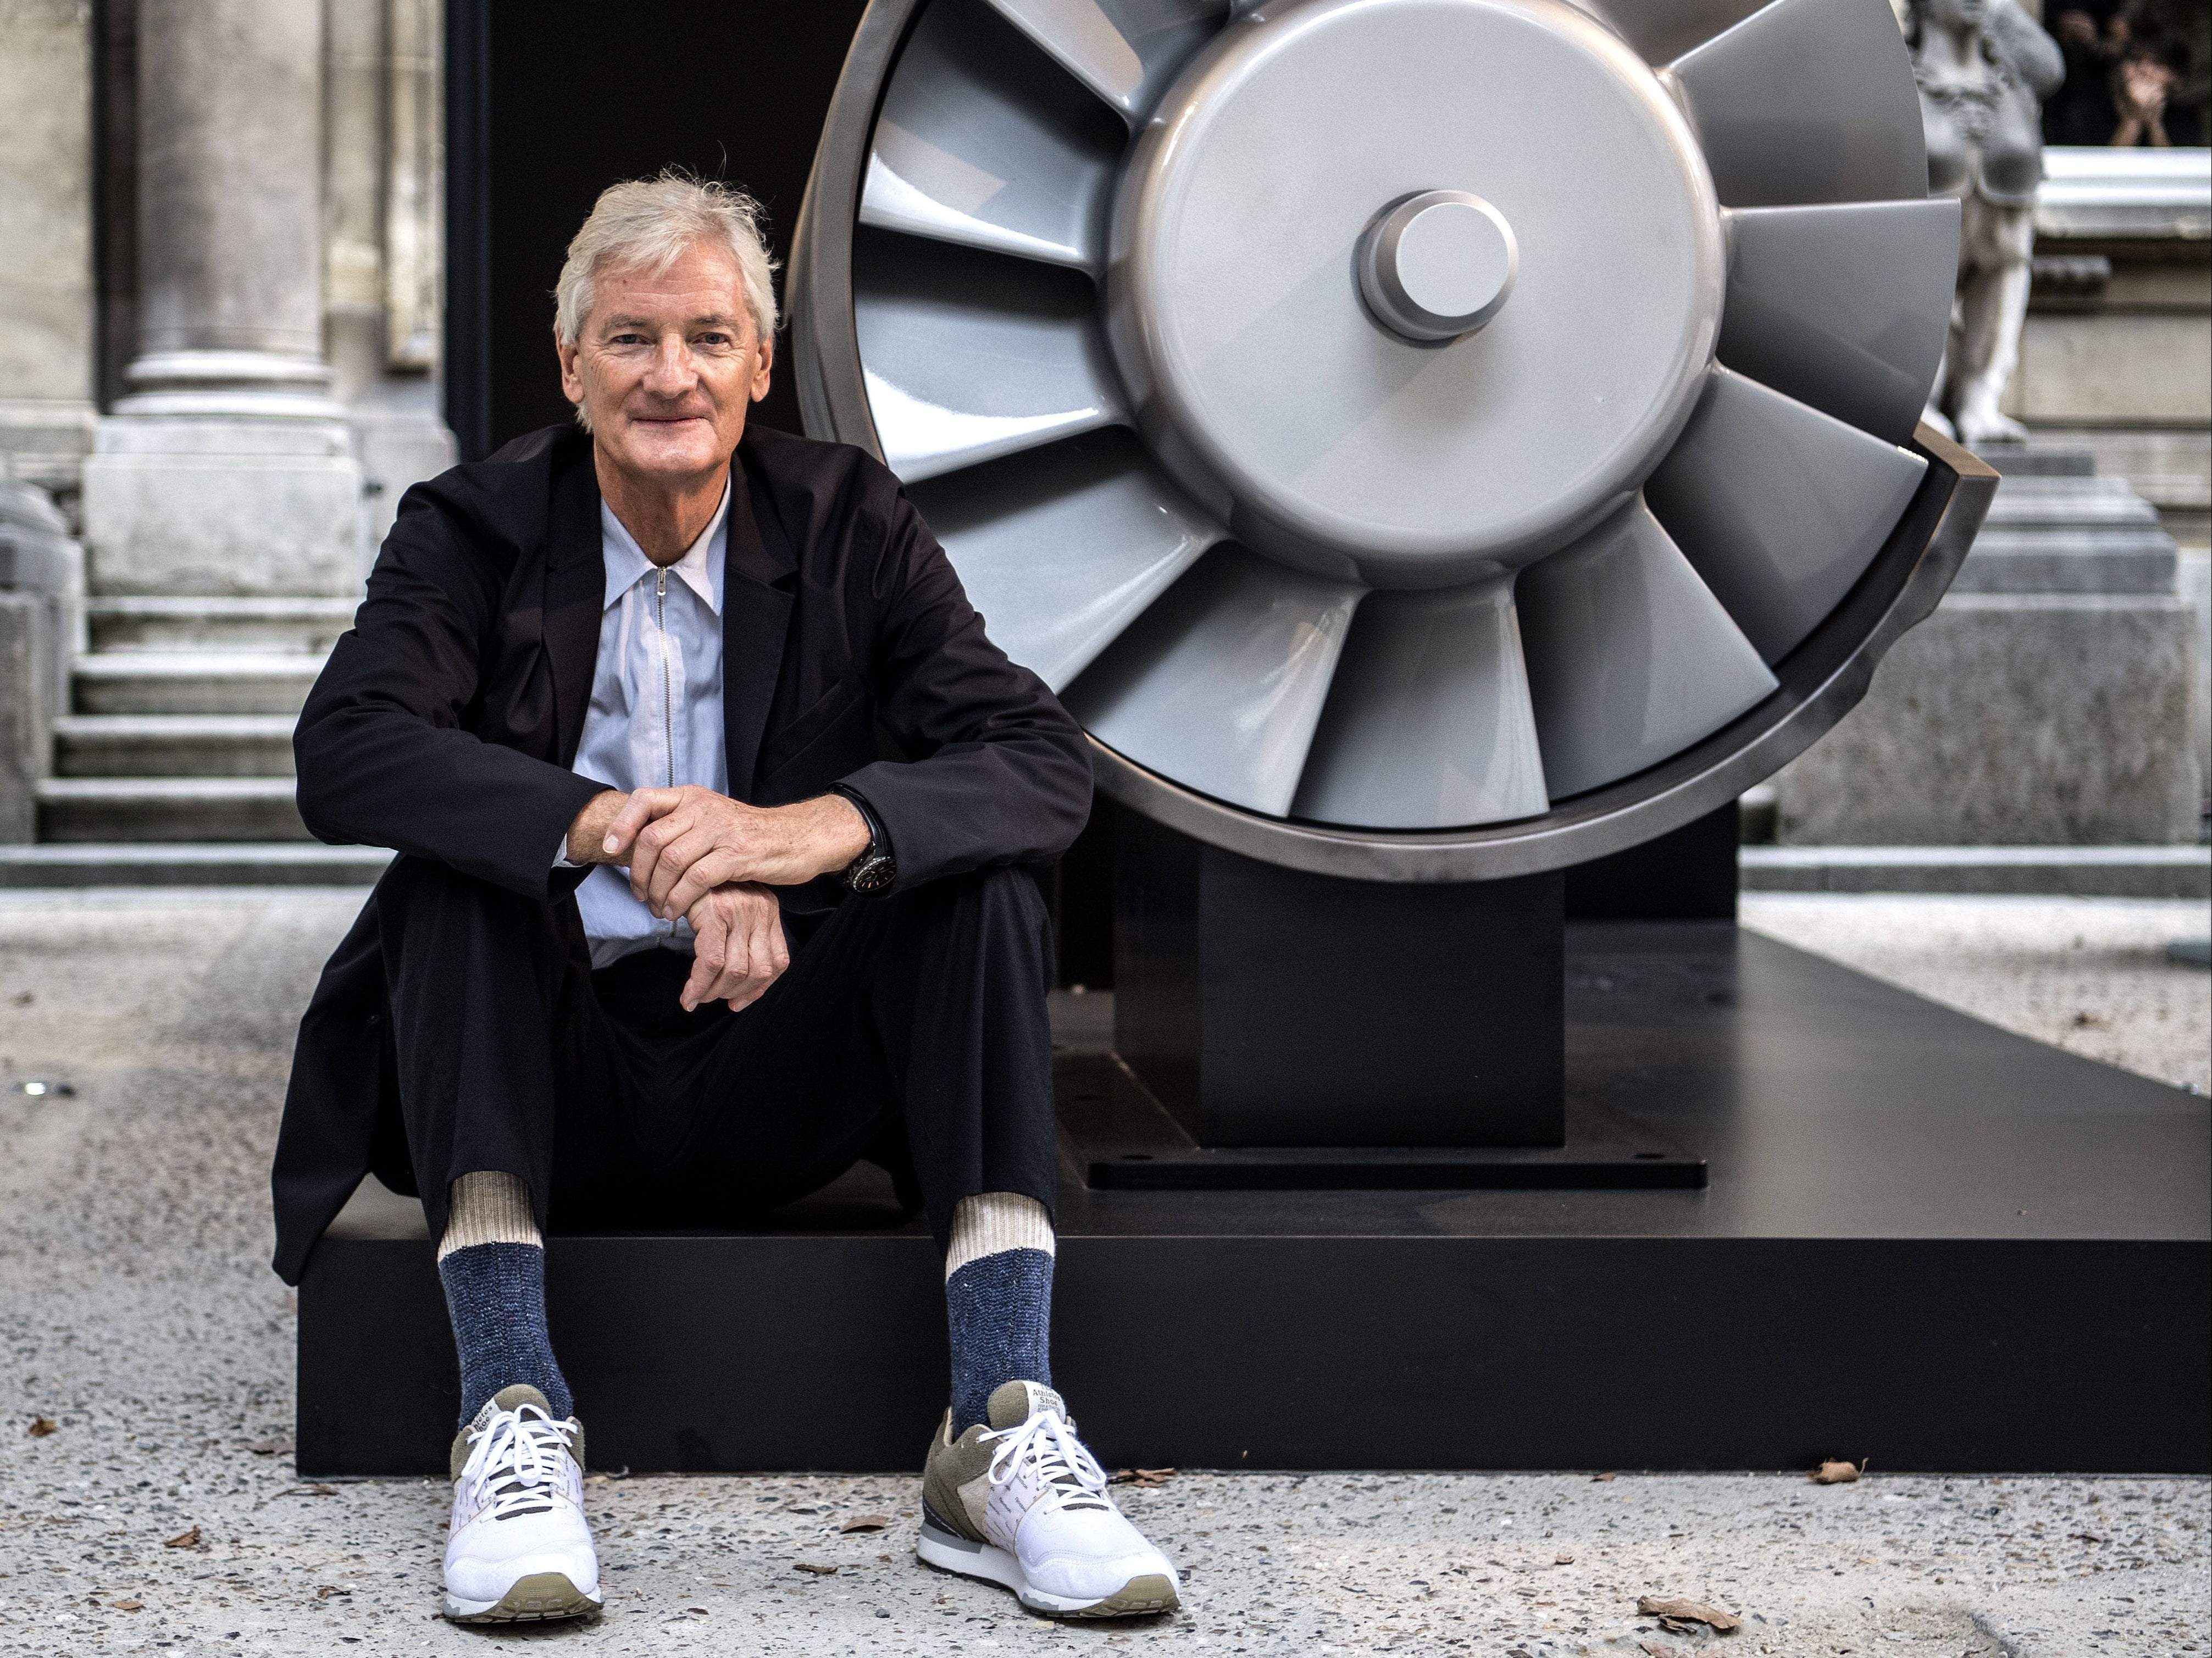 The entrepreneur made his fortune after founding Dyson Ltd in 1991 and starting to make and sell his products himself